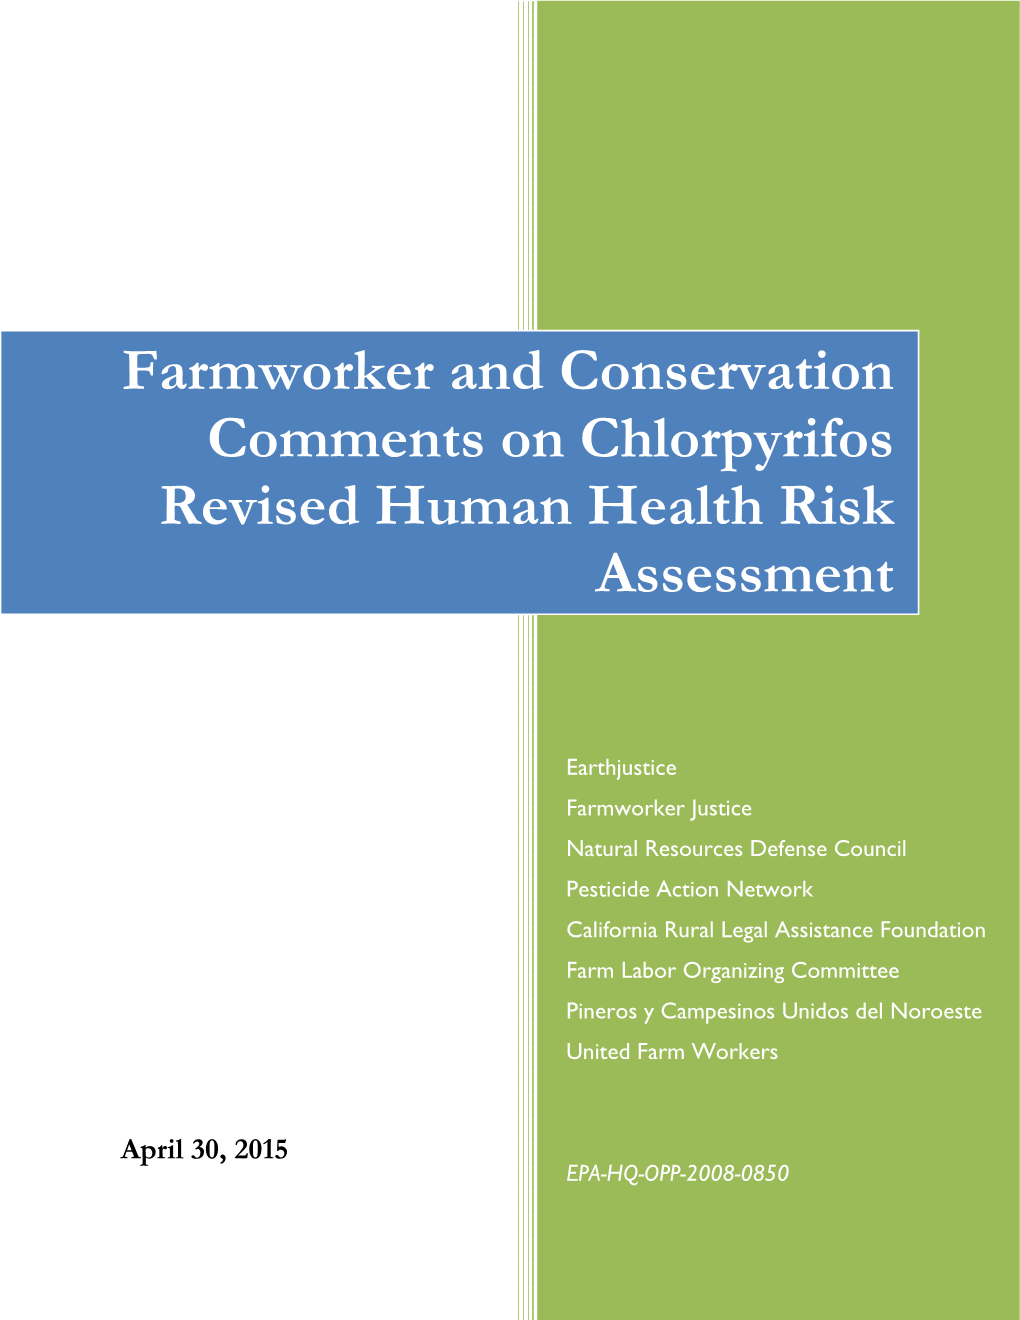 Farmworker and Conservation Comments on Chlorpyrifos Revised